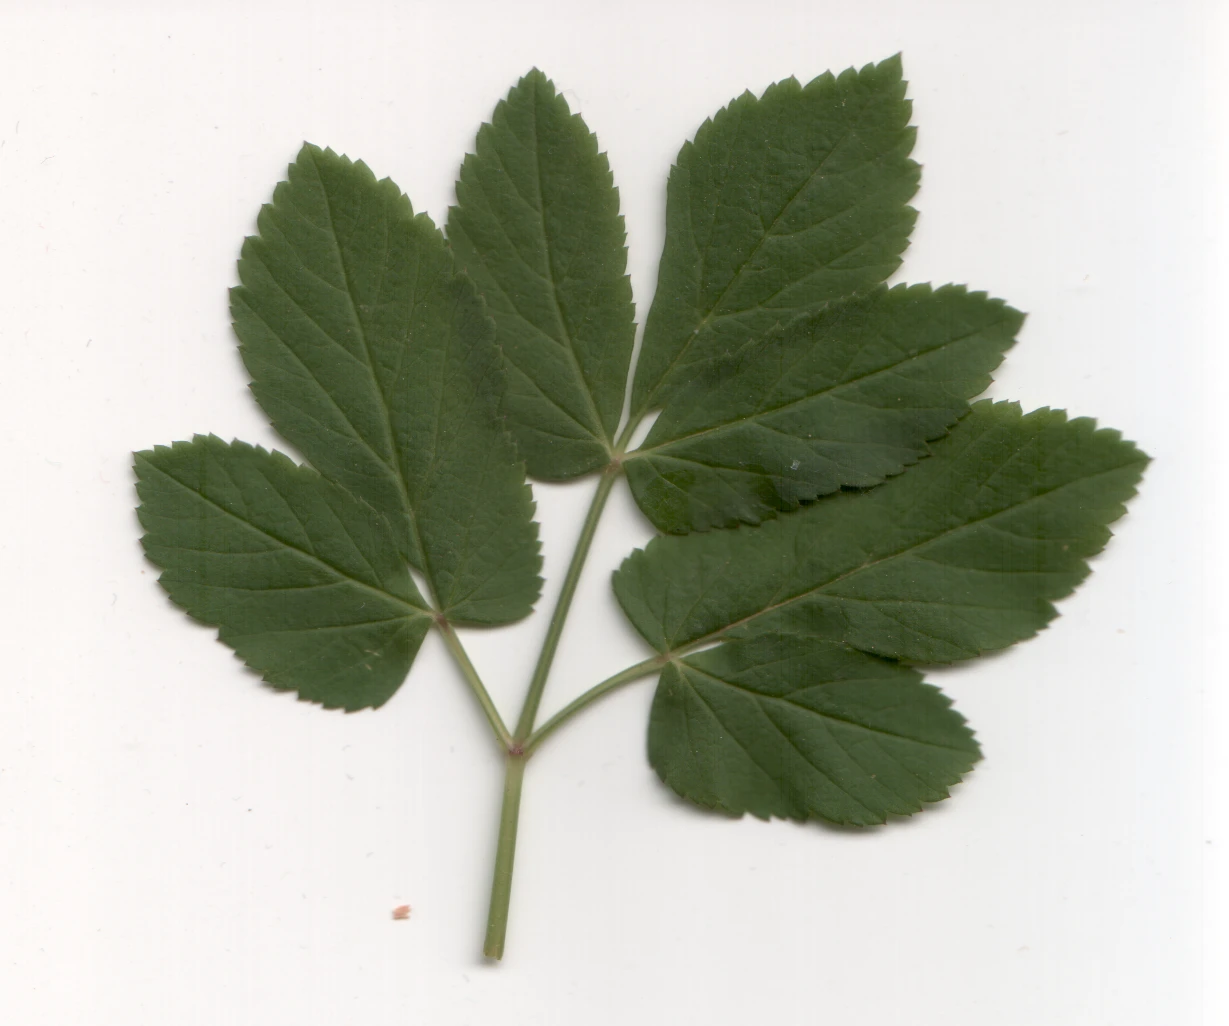 Typical young ground elder growth showing “goat’s foot” leaf pattern